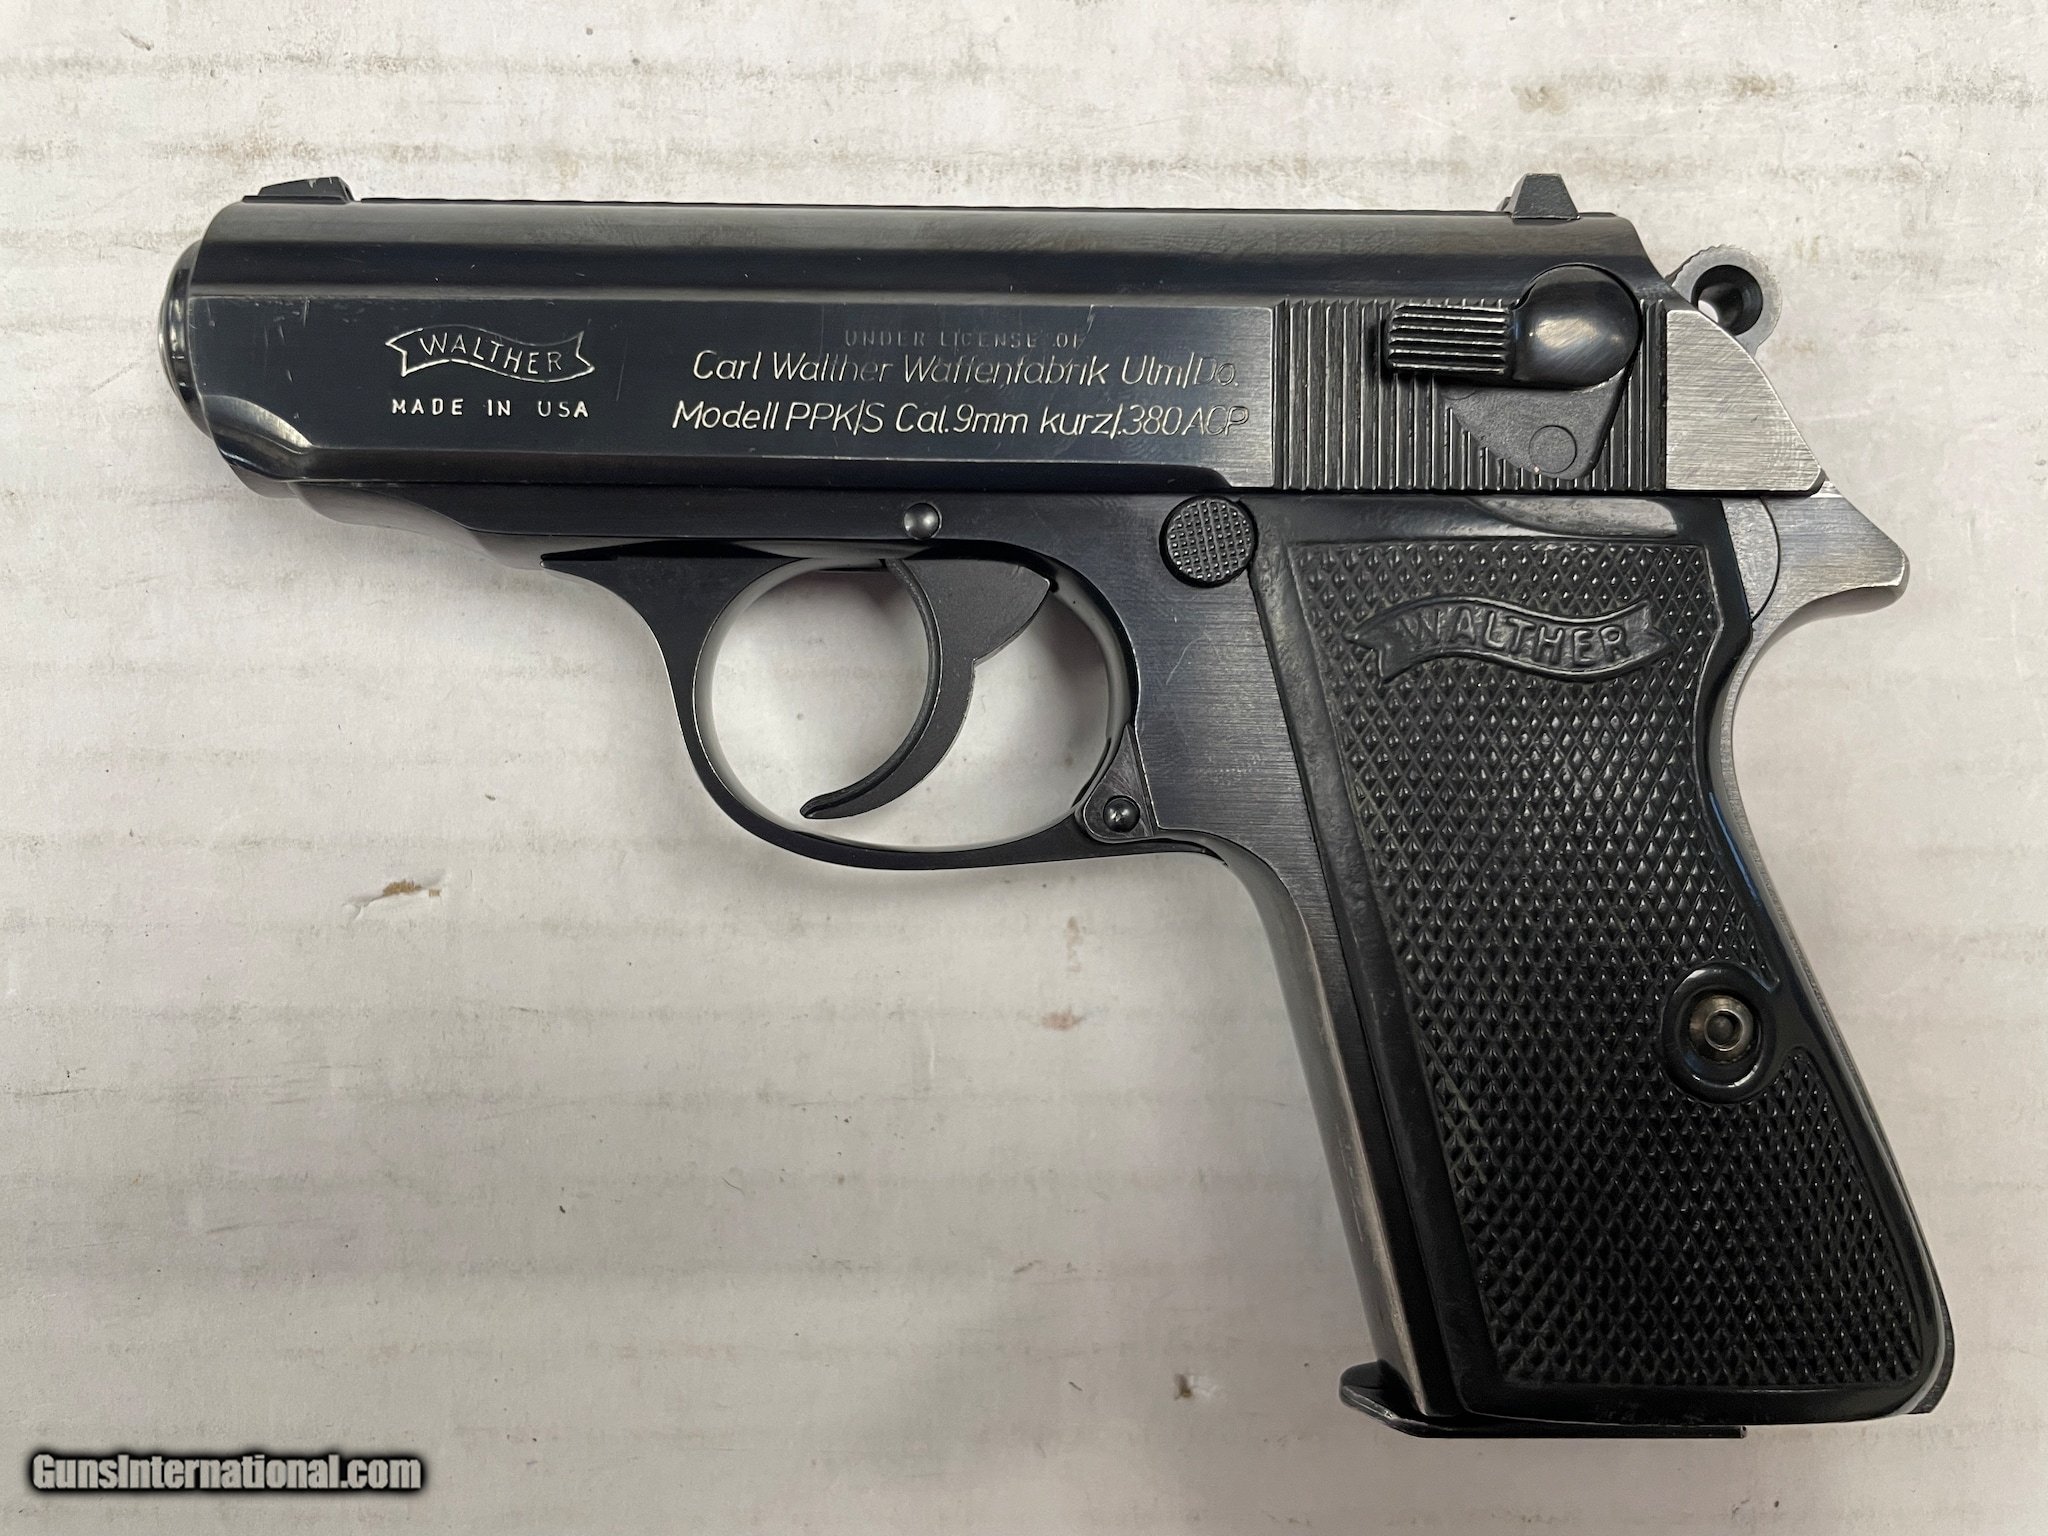 WALTHER PPK-S .380 ACP